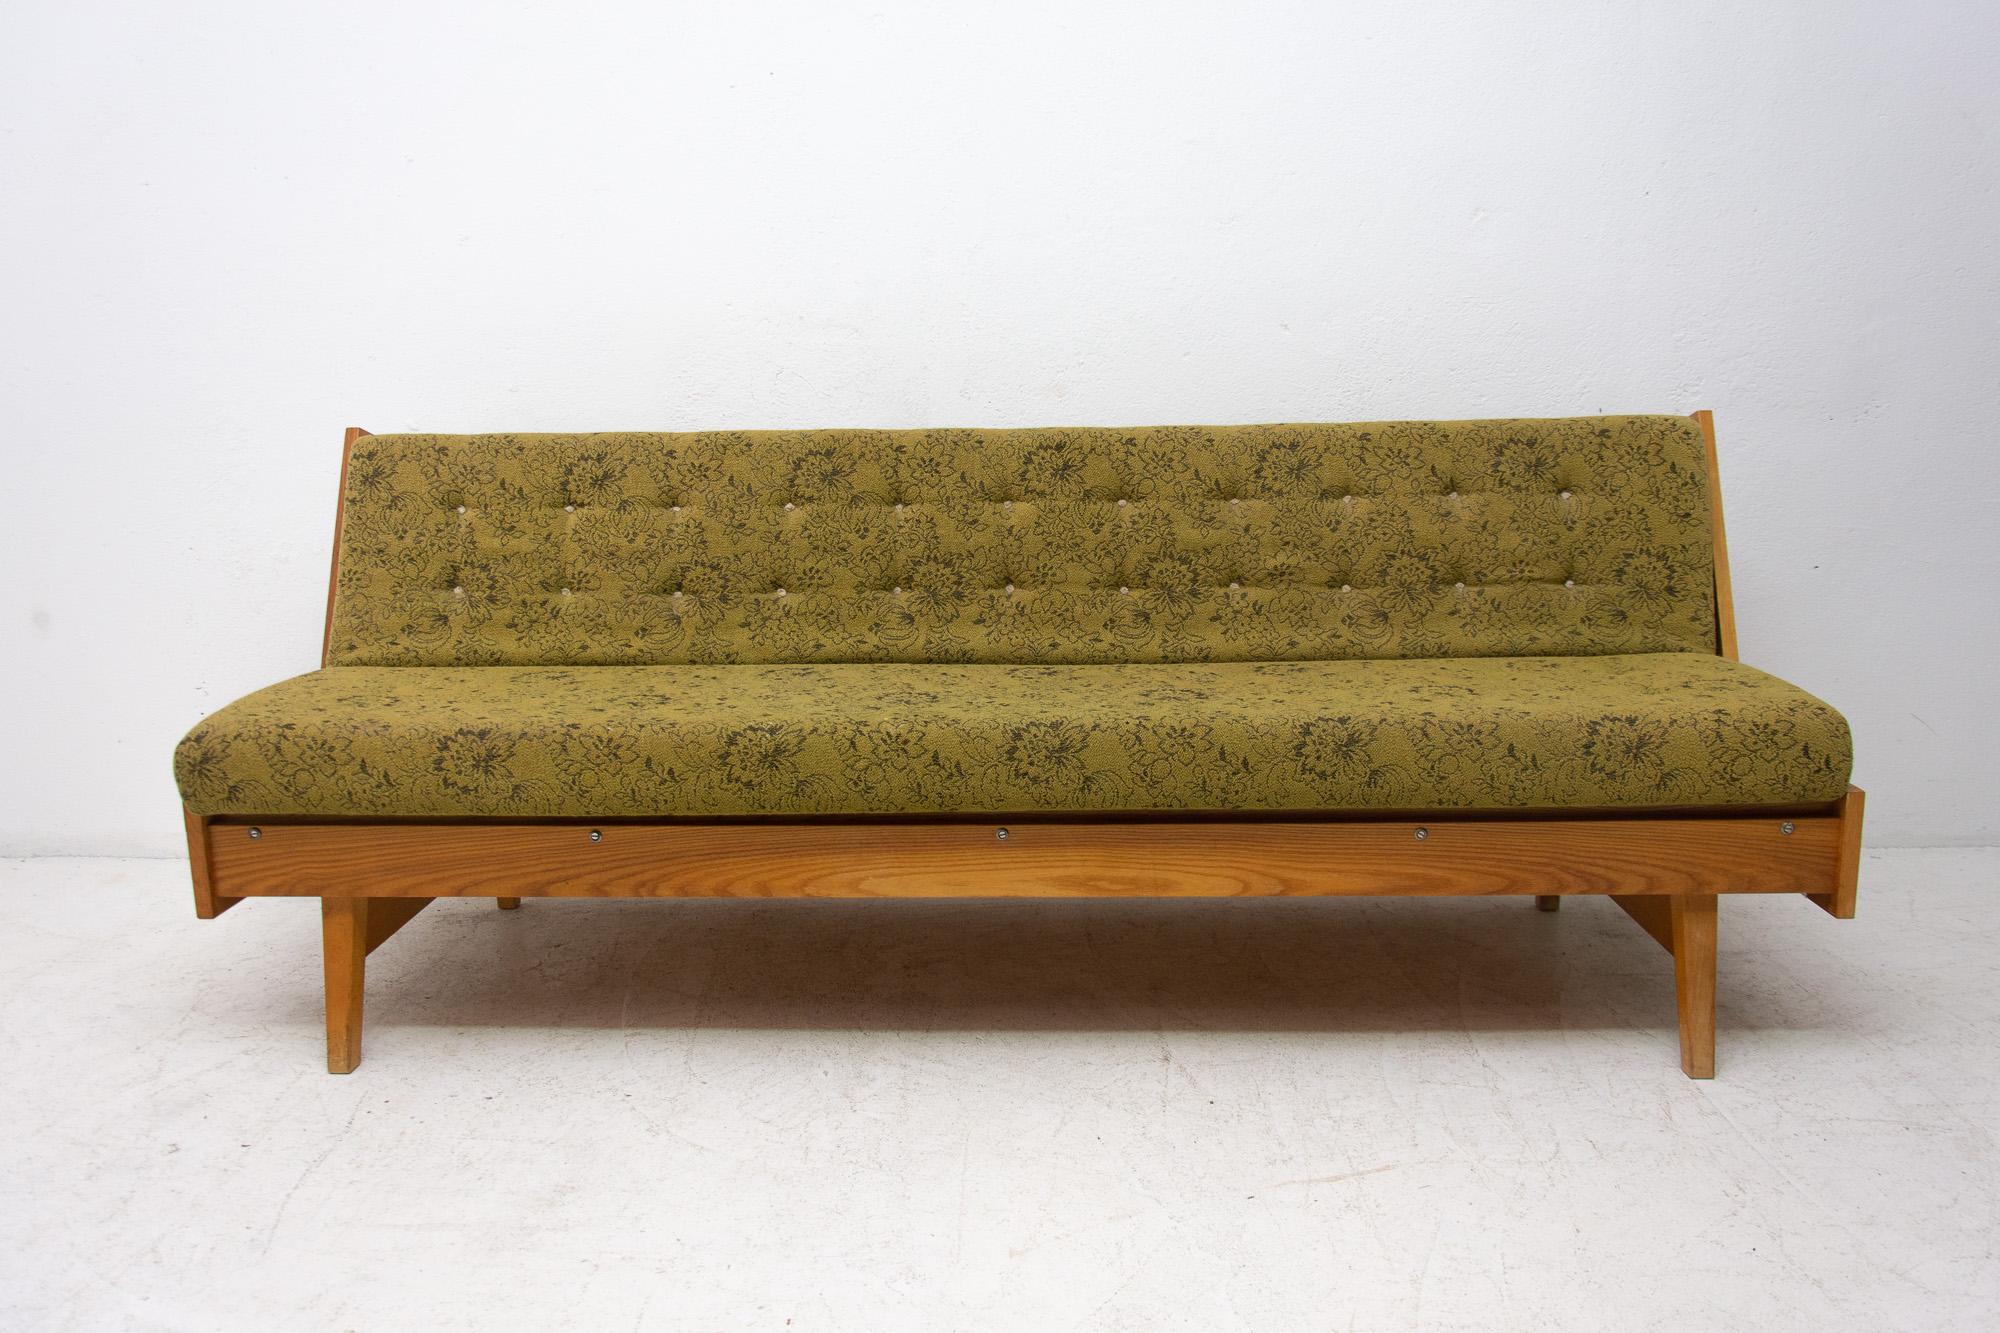 Midcentury sofa bed, made in the former Czechoslovakia in the 1960s. This sofa features a wooden structure that is veneered in oak. The sofa is in very good original condition, shows slight signs of age and using.

Measures: Unfolded 195 × 75 cm.